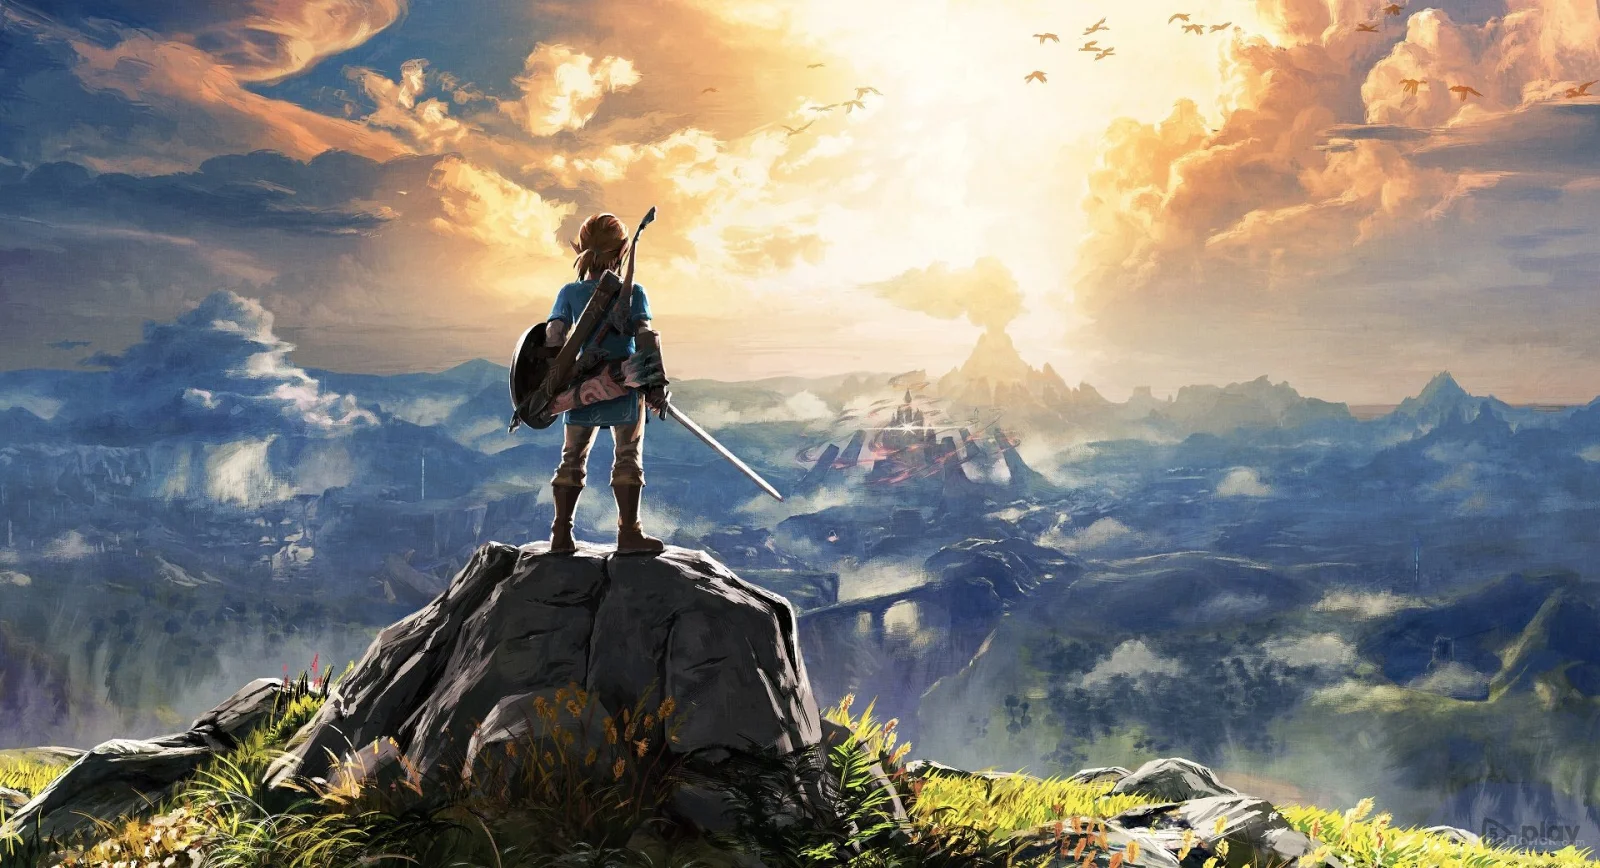 The director of the film adaptation of The Legend of Zelda spoke about his vision for the film